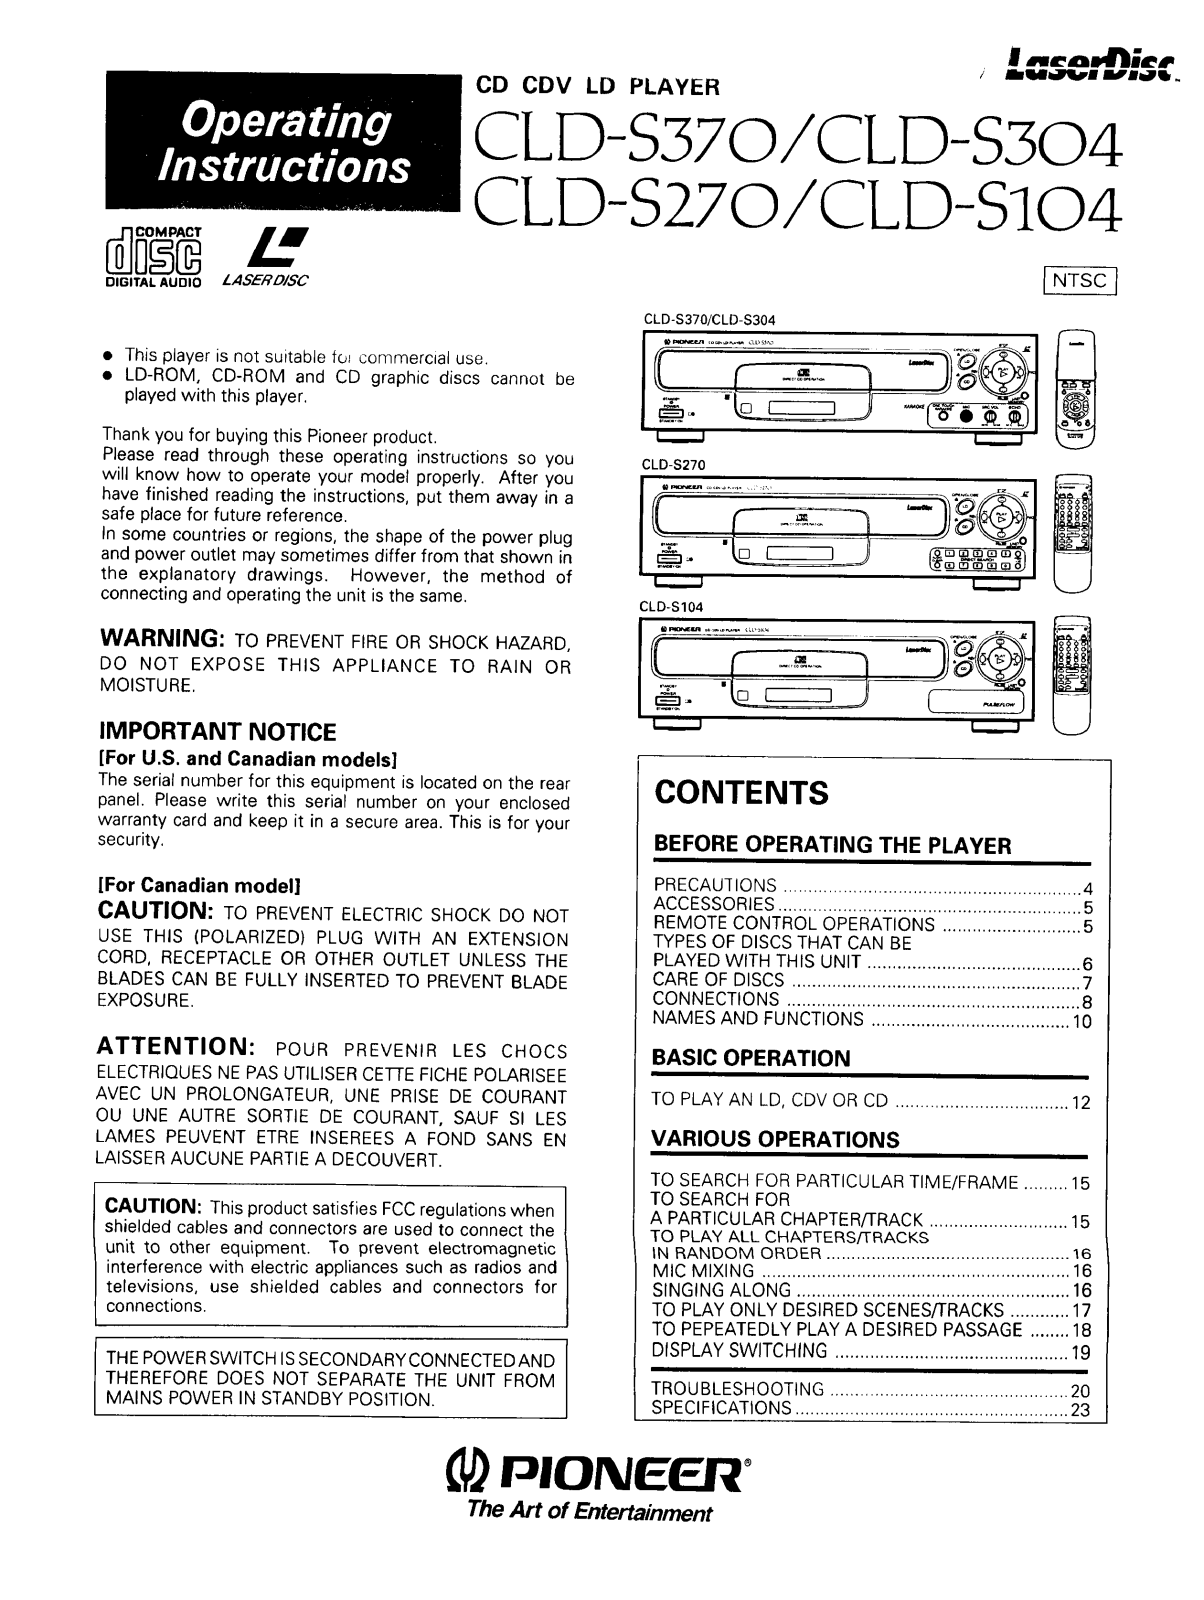 Pioneer CLD-S304, CLD-S104 Owner’s Manual